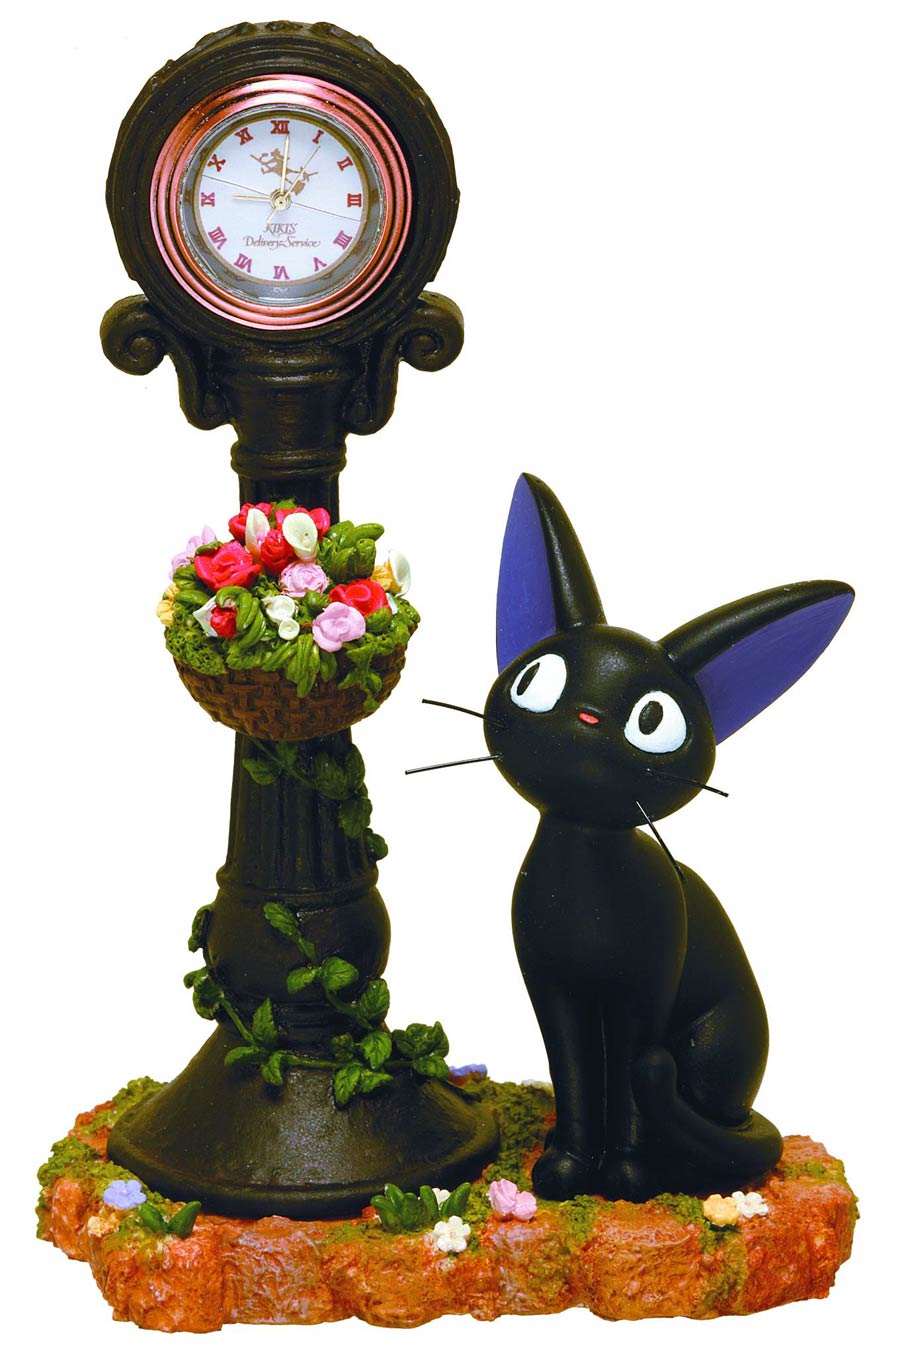 Kikis Delivery Service Diorama Style Clock - Jijis In Town